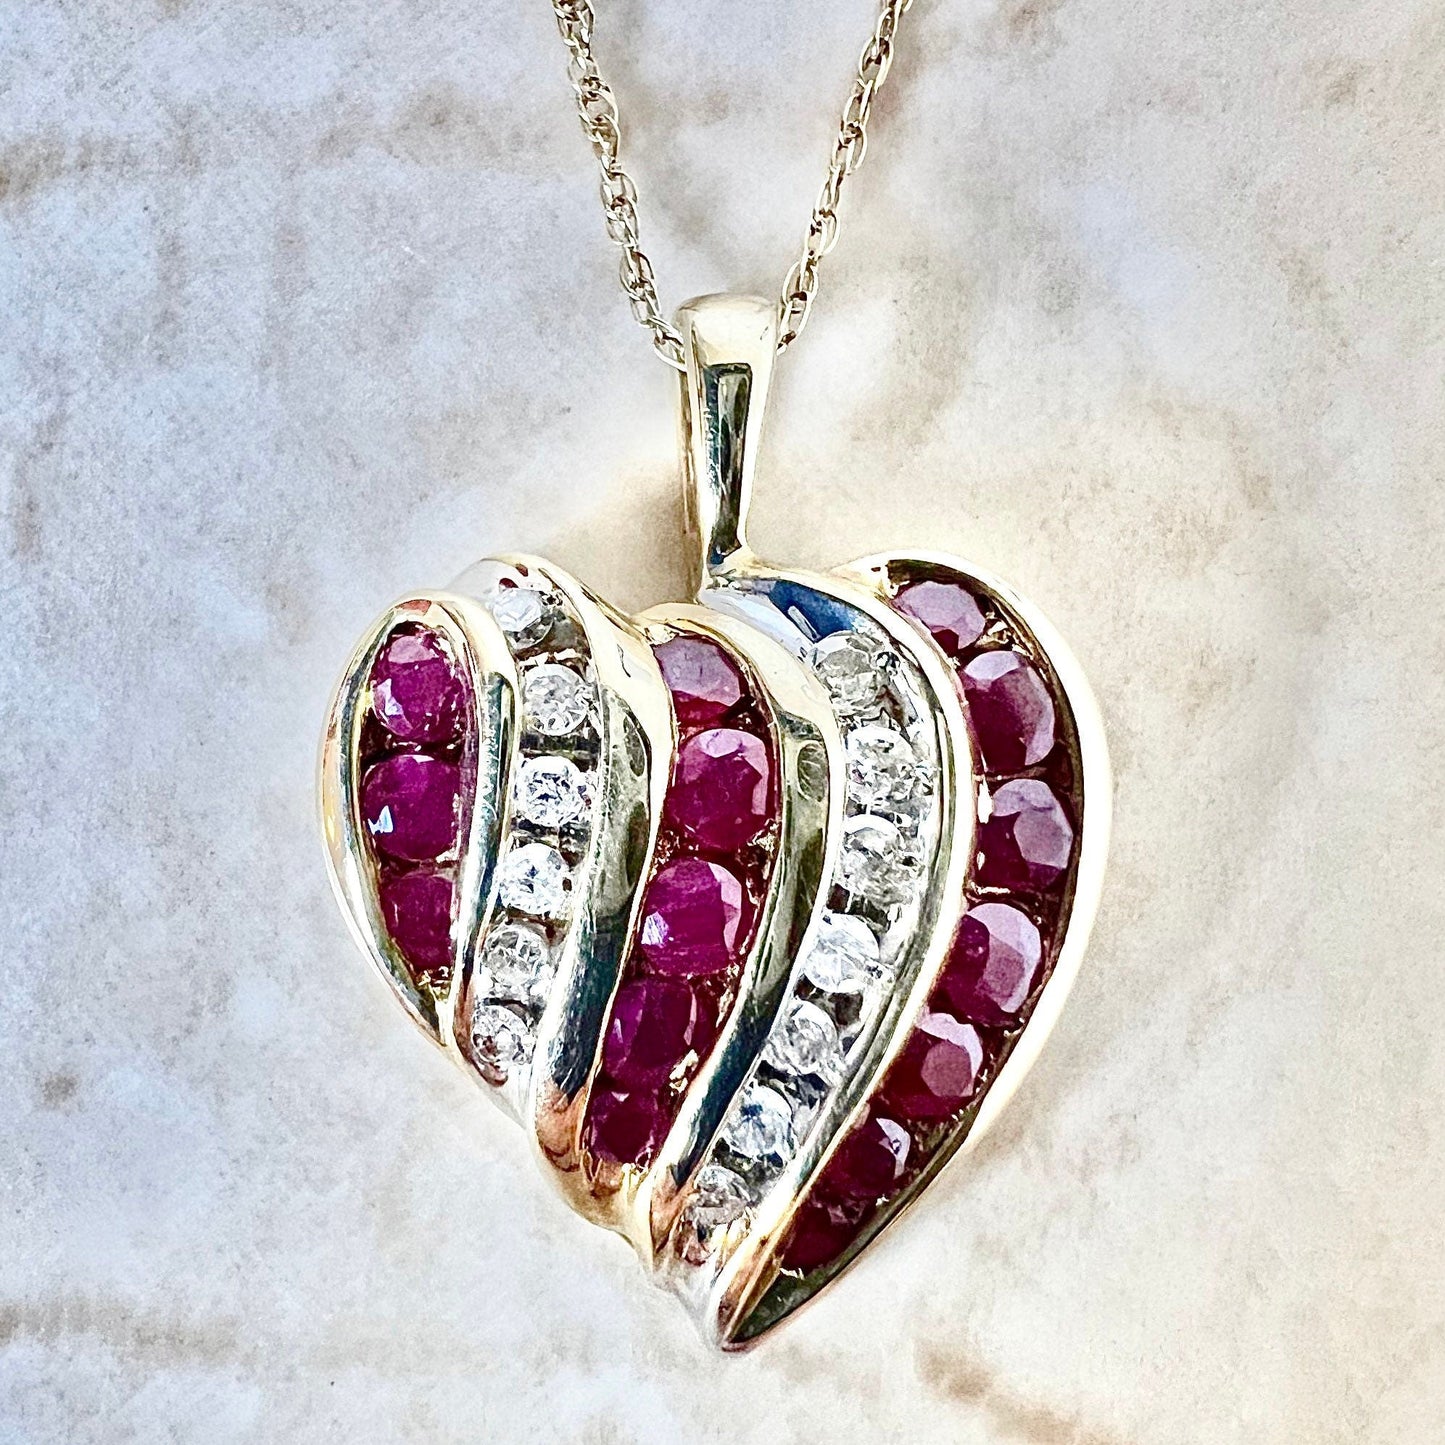 Vintage 10K Natural Ruby & Diamond Heart Pendant Necklace - Yellow Gold Ruby Pendant- April July Birthstone - Valentine’s Day Gift For Her